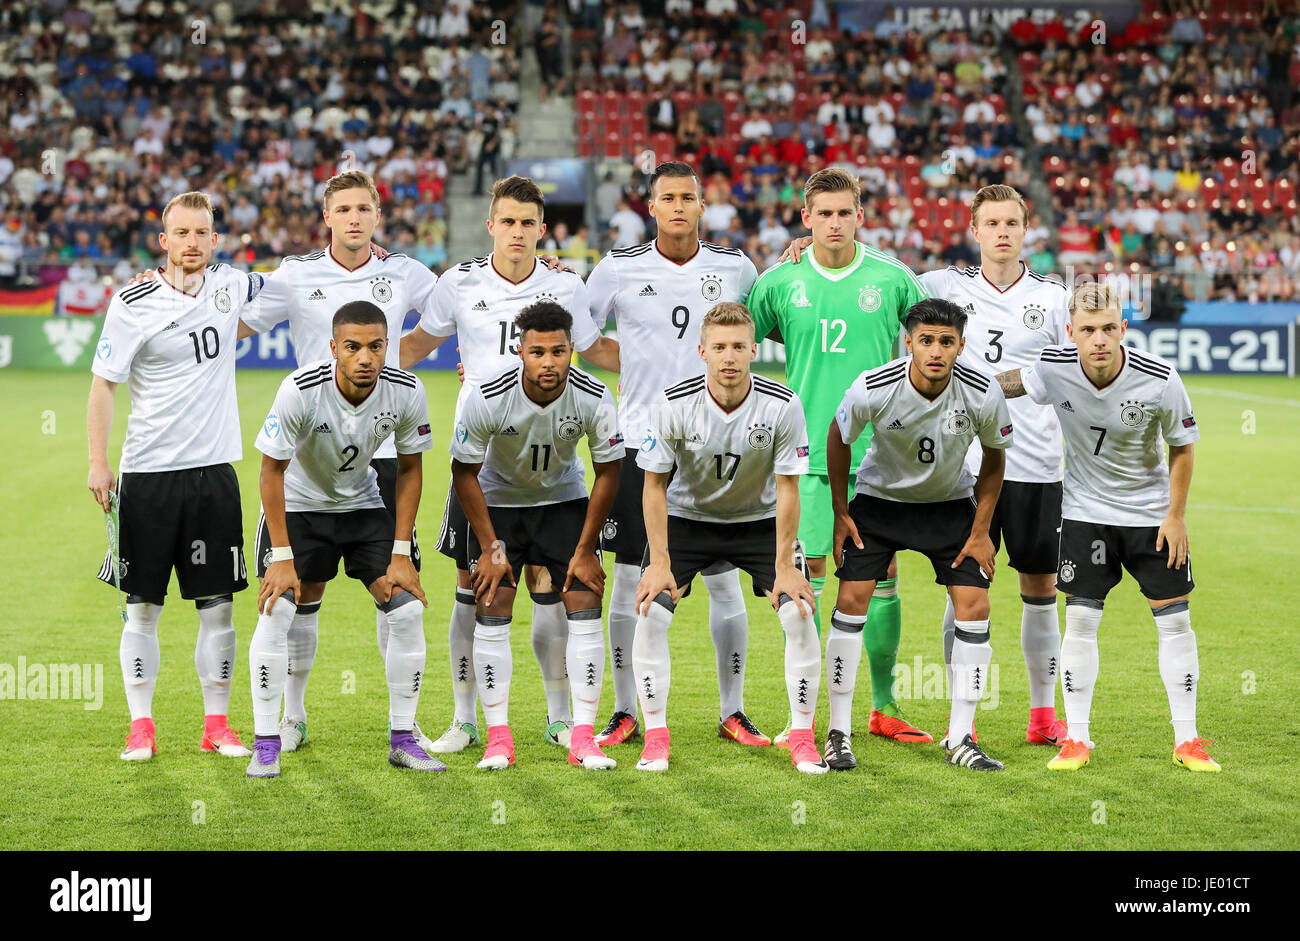 Cracow, Poland. 21st June, 2017. The German squad posing for a team picture before the group C preliminary stage soccer match between Germany and Denmark at the U-21 European Championship that took place in Cracow, Poland, 21 June 2017. First row, left to right: Jeremy Toljan, Serge Gnabry, Mitchell Weiser, Mahmoud Dahoud, Max Meyer. Second row, left to right: Maximilian Arnold, Niklas Stark, Marc-Oliver Kempf, Davie Selke, goalkeeper Julian Pollersbeck, Yannick Gerhardt. Photo: Jan Woitas/dpa-Zentralbild/dpa/Alamy Live News Stock Photo